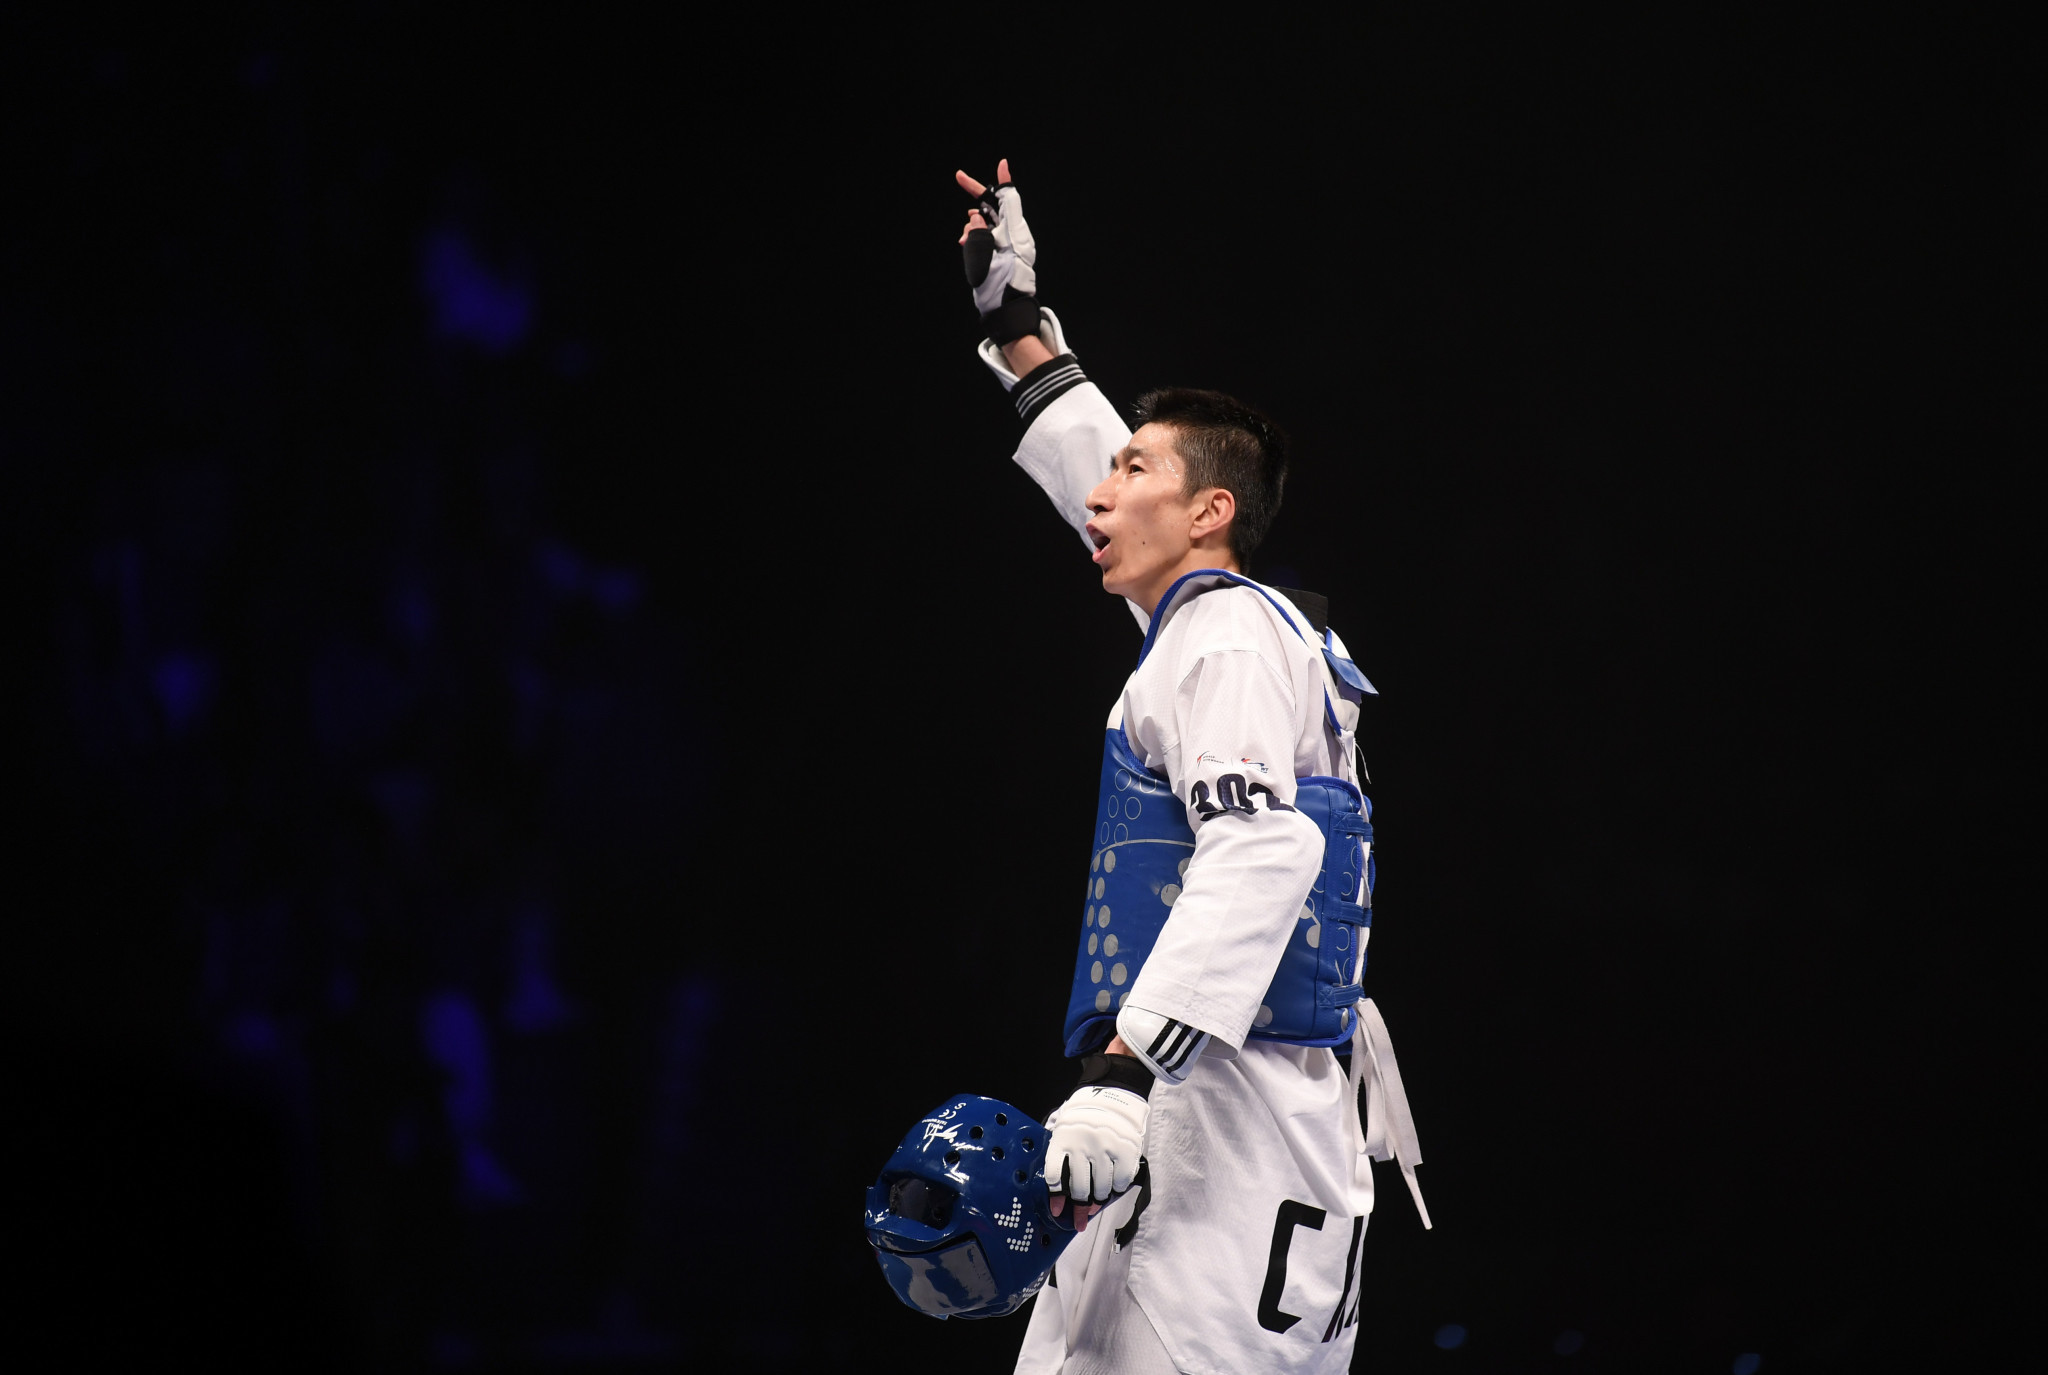 Olympic champion Zhao Shuai retained his world title at the 2019 World Taekwondo Championships ©Getty Images